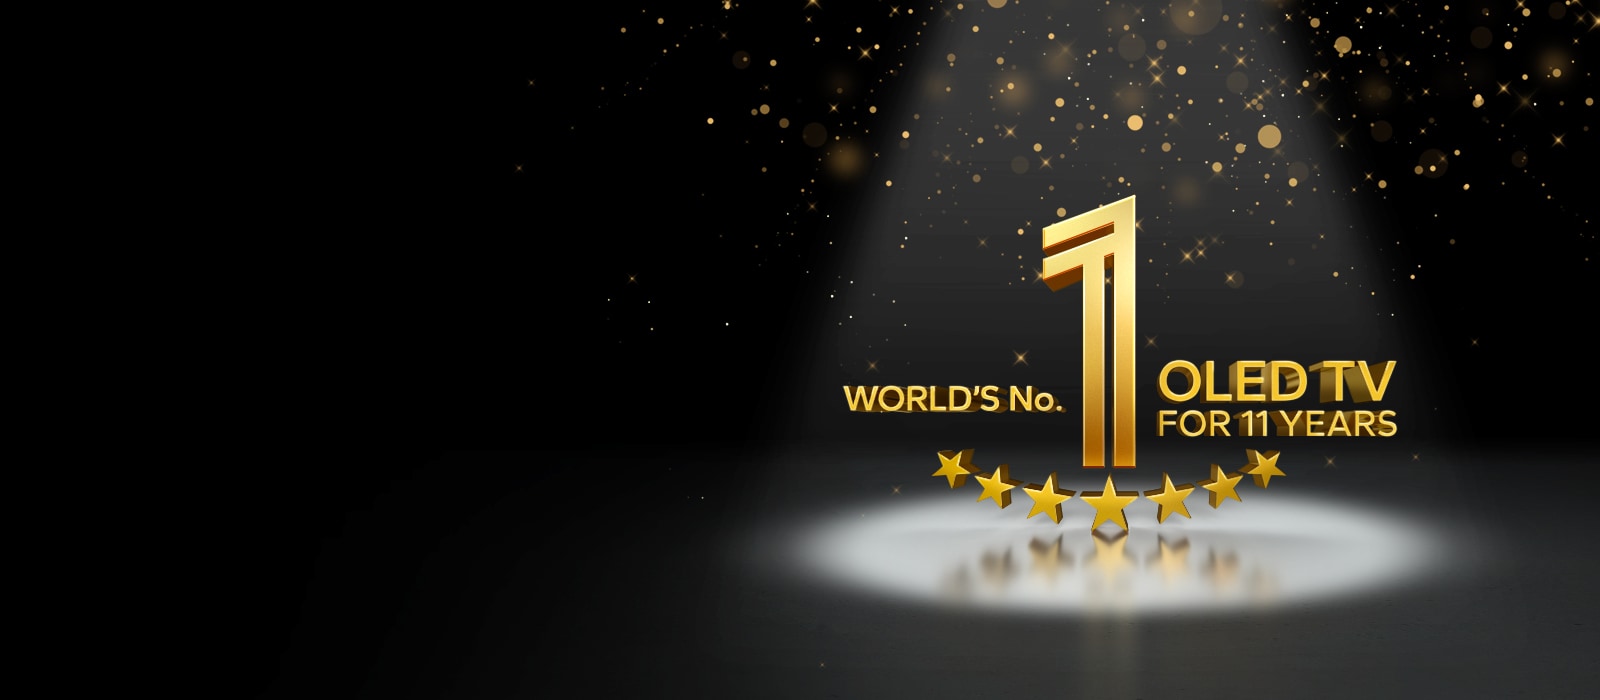 An image of the gold World's No.1 OLED TV for 11 Years emblem against a black backdrop. A spotlight shines on the emblem, and gold abstract stars fill the sky above it.